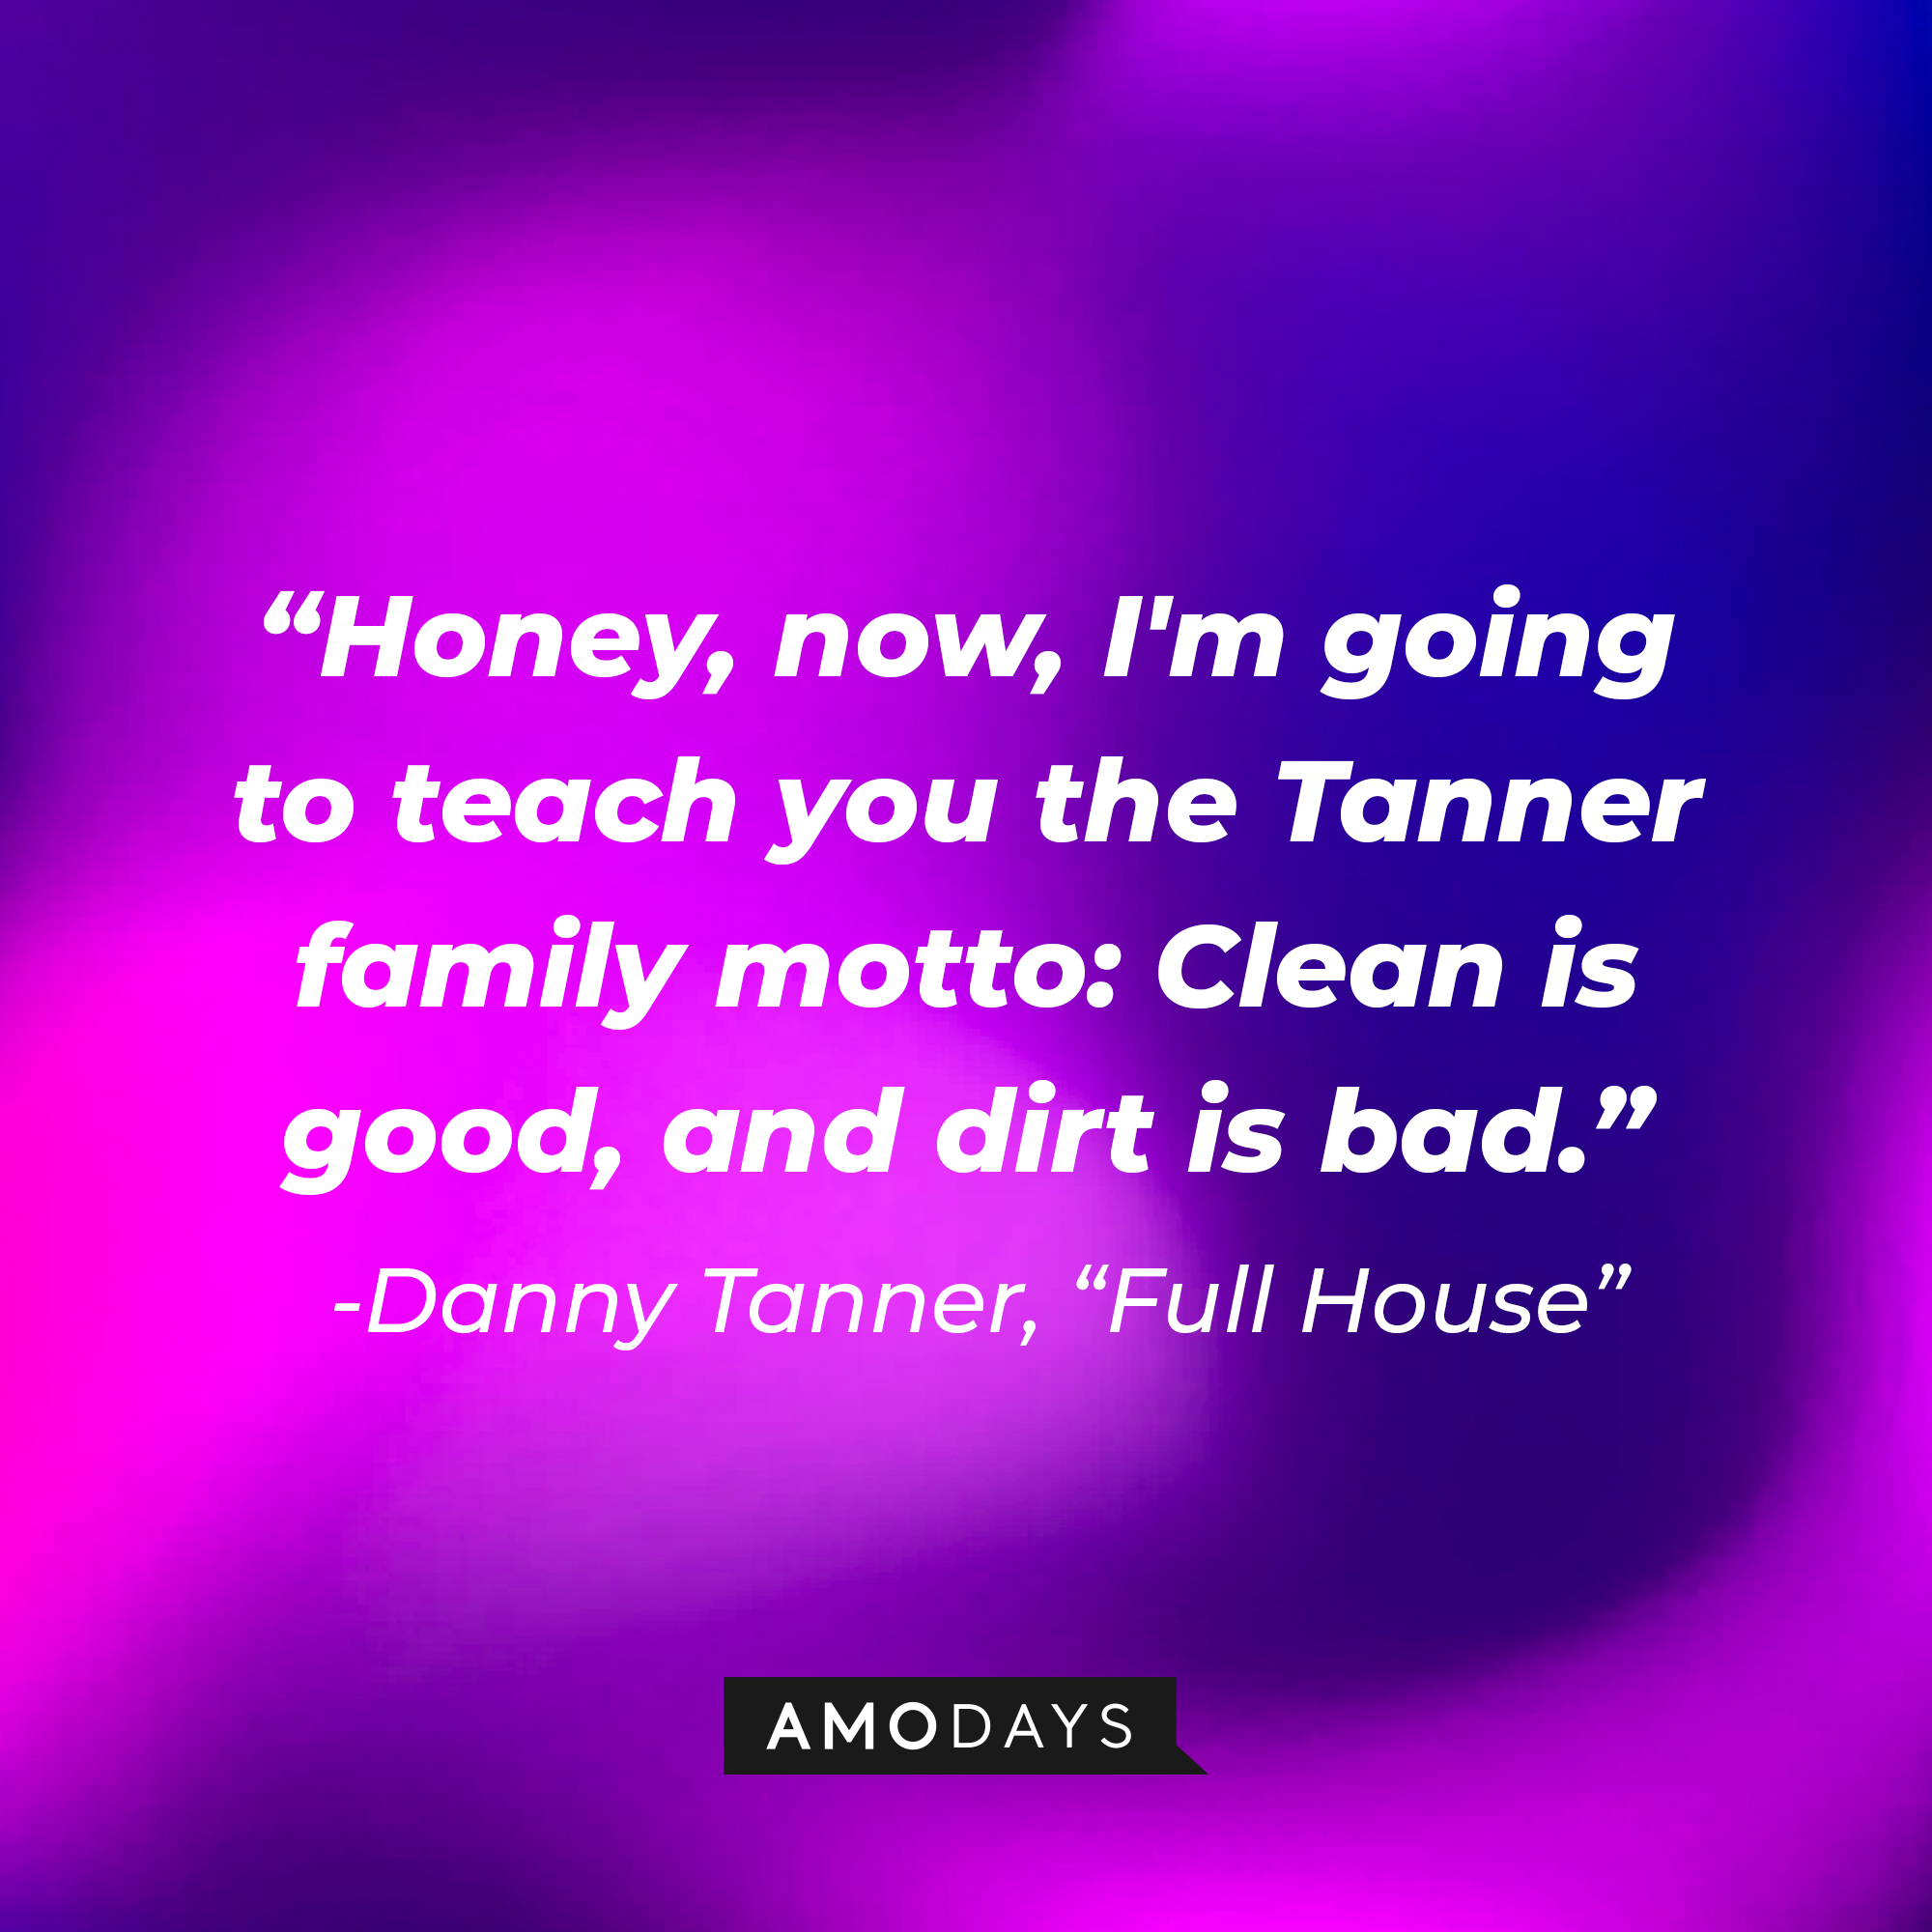 Danny Tanner's quote from "Full House" : "Honey, now, I'm going to teach you the Tanner family motto: Clean is good, and dirt is bad" | Source: facebook.com/FullHouseTVshow